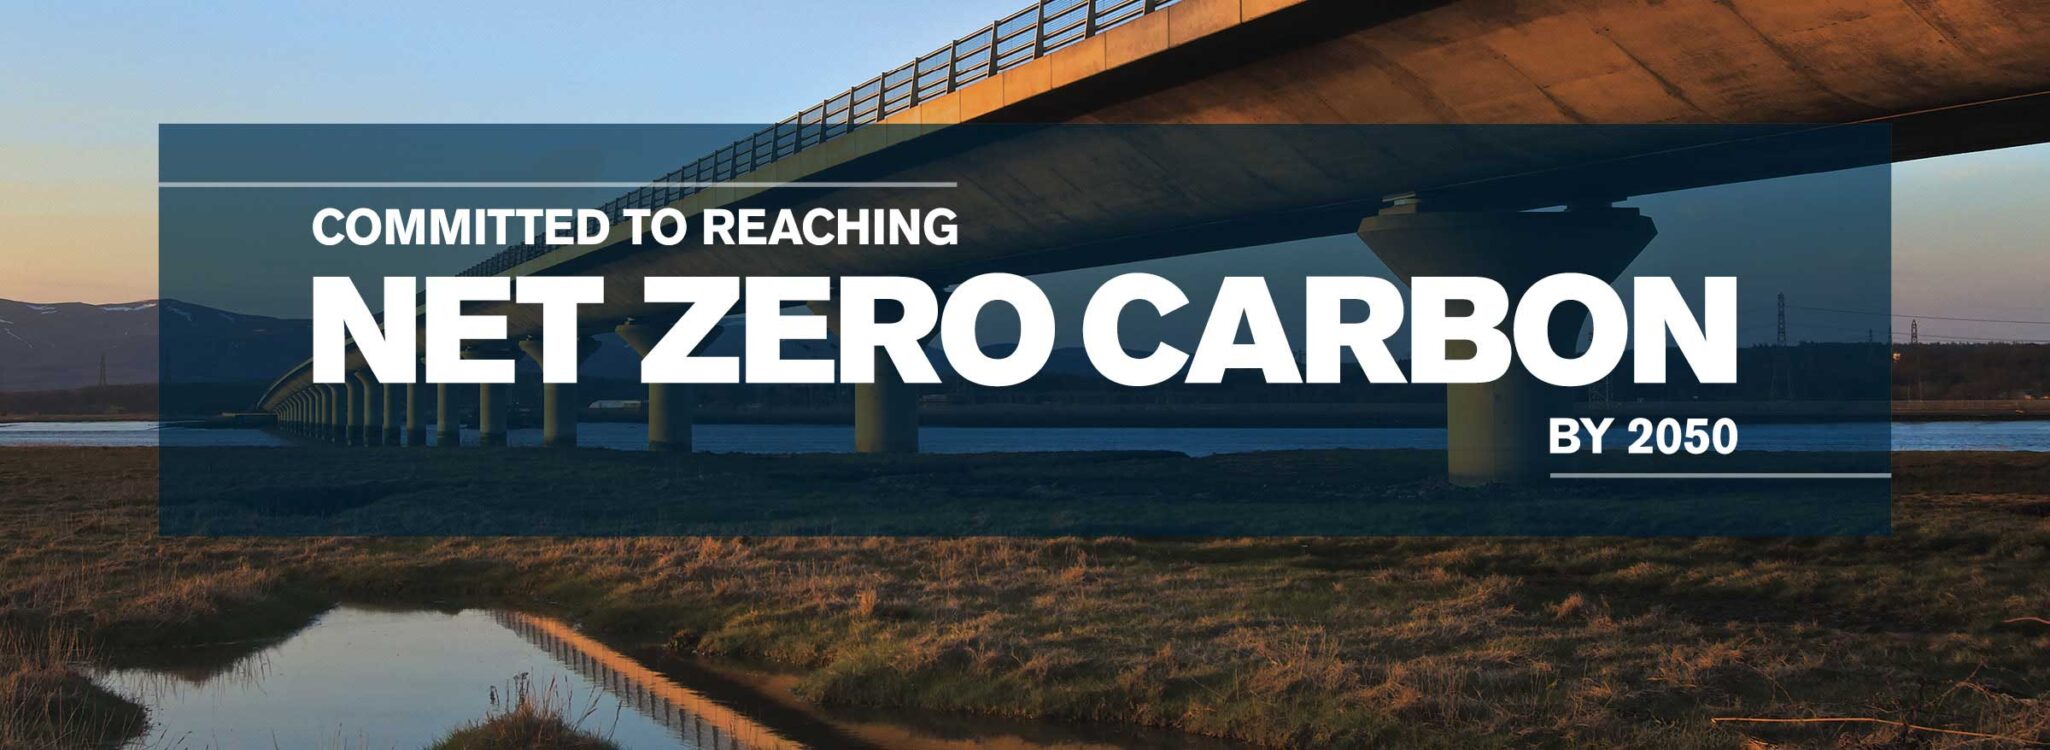 Committed to reaching Net Zero Carbon by 2050